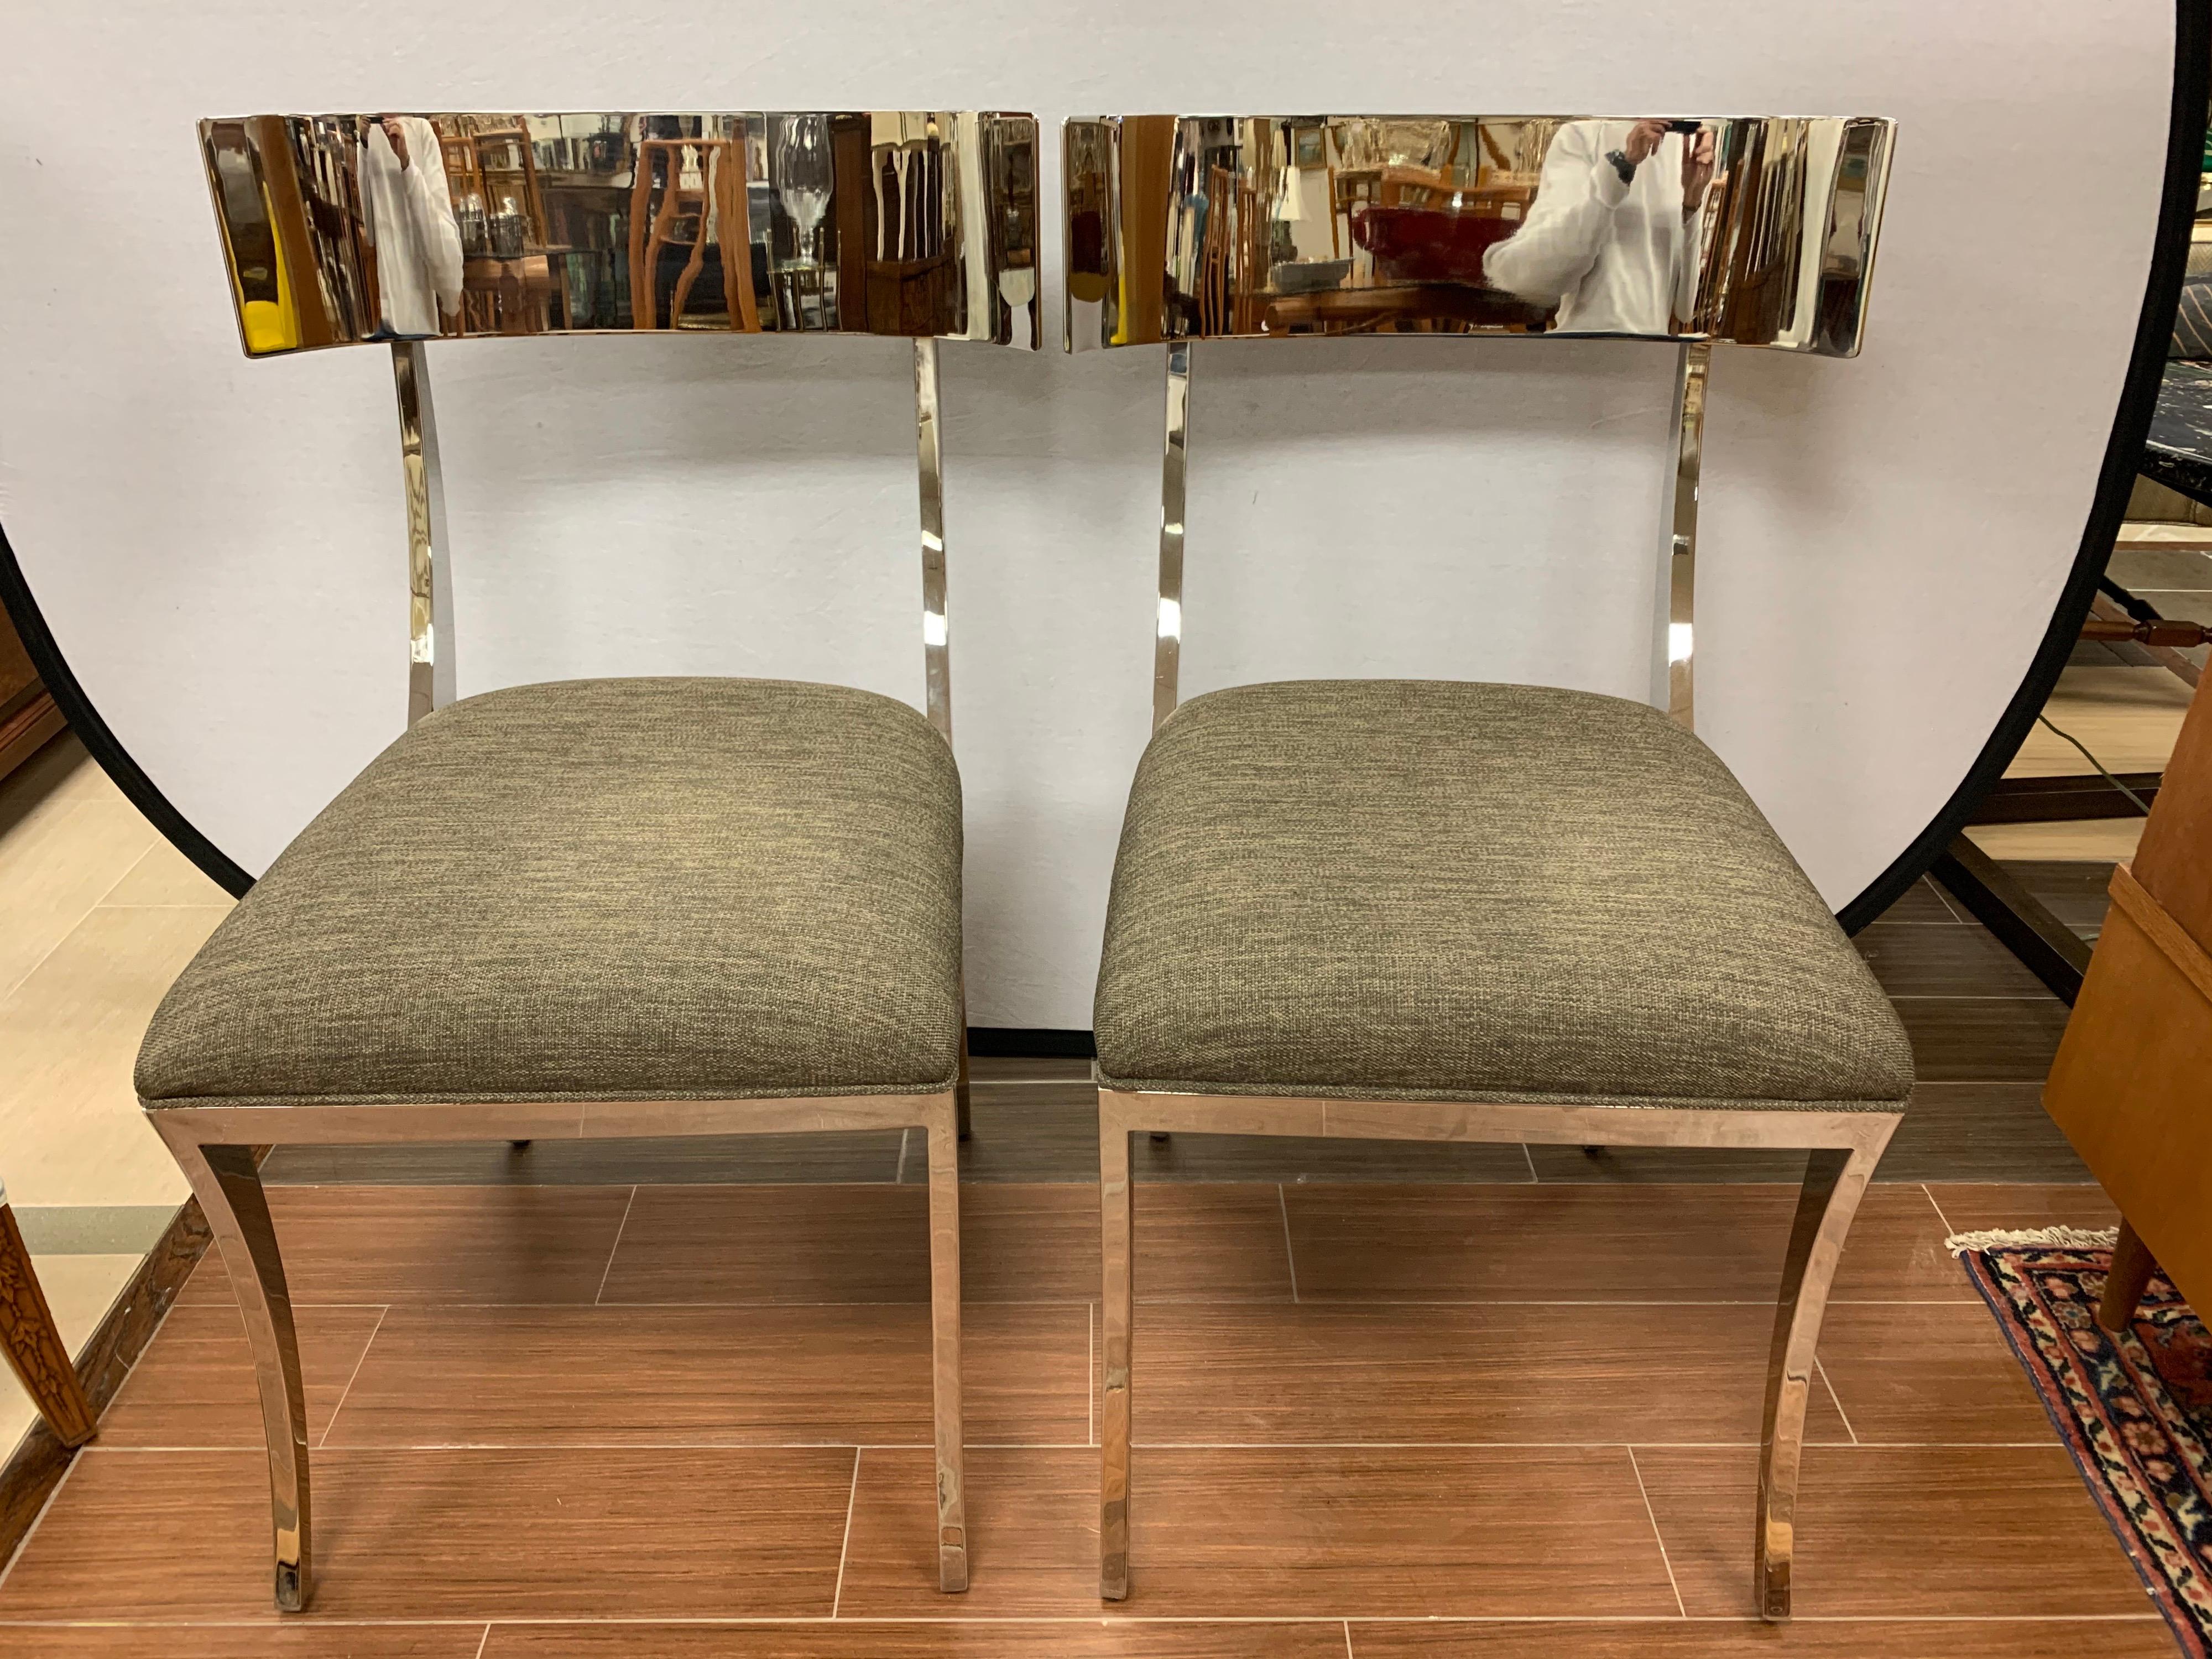 Elegant pair of polished chrome Klismos chairs, circa late 20th century, USA. Sleek neoclassical style polished chrome klismos chairs with upholstered dark gray linen seat. Sexy, beautiful curves and heavy, solid construction.